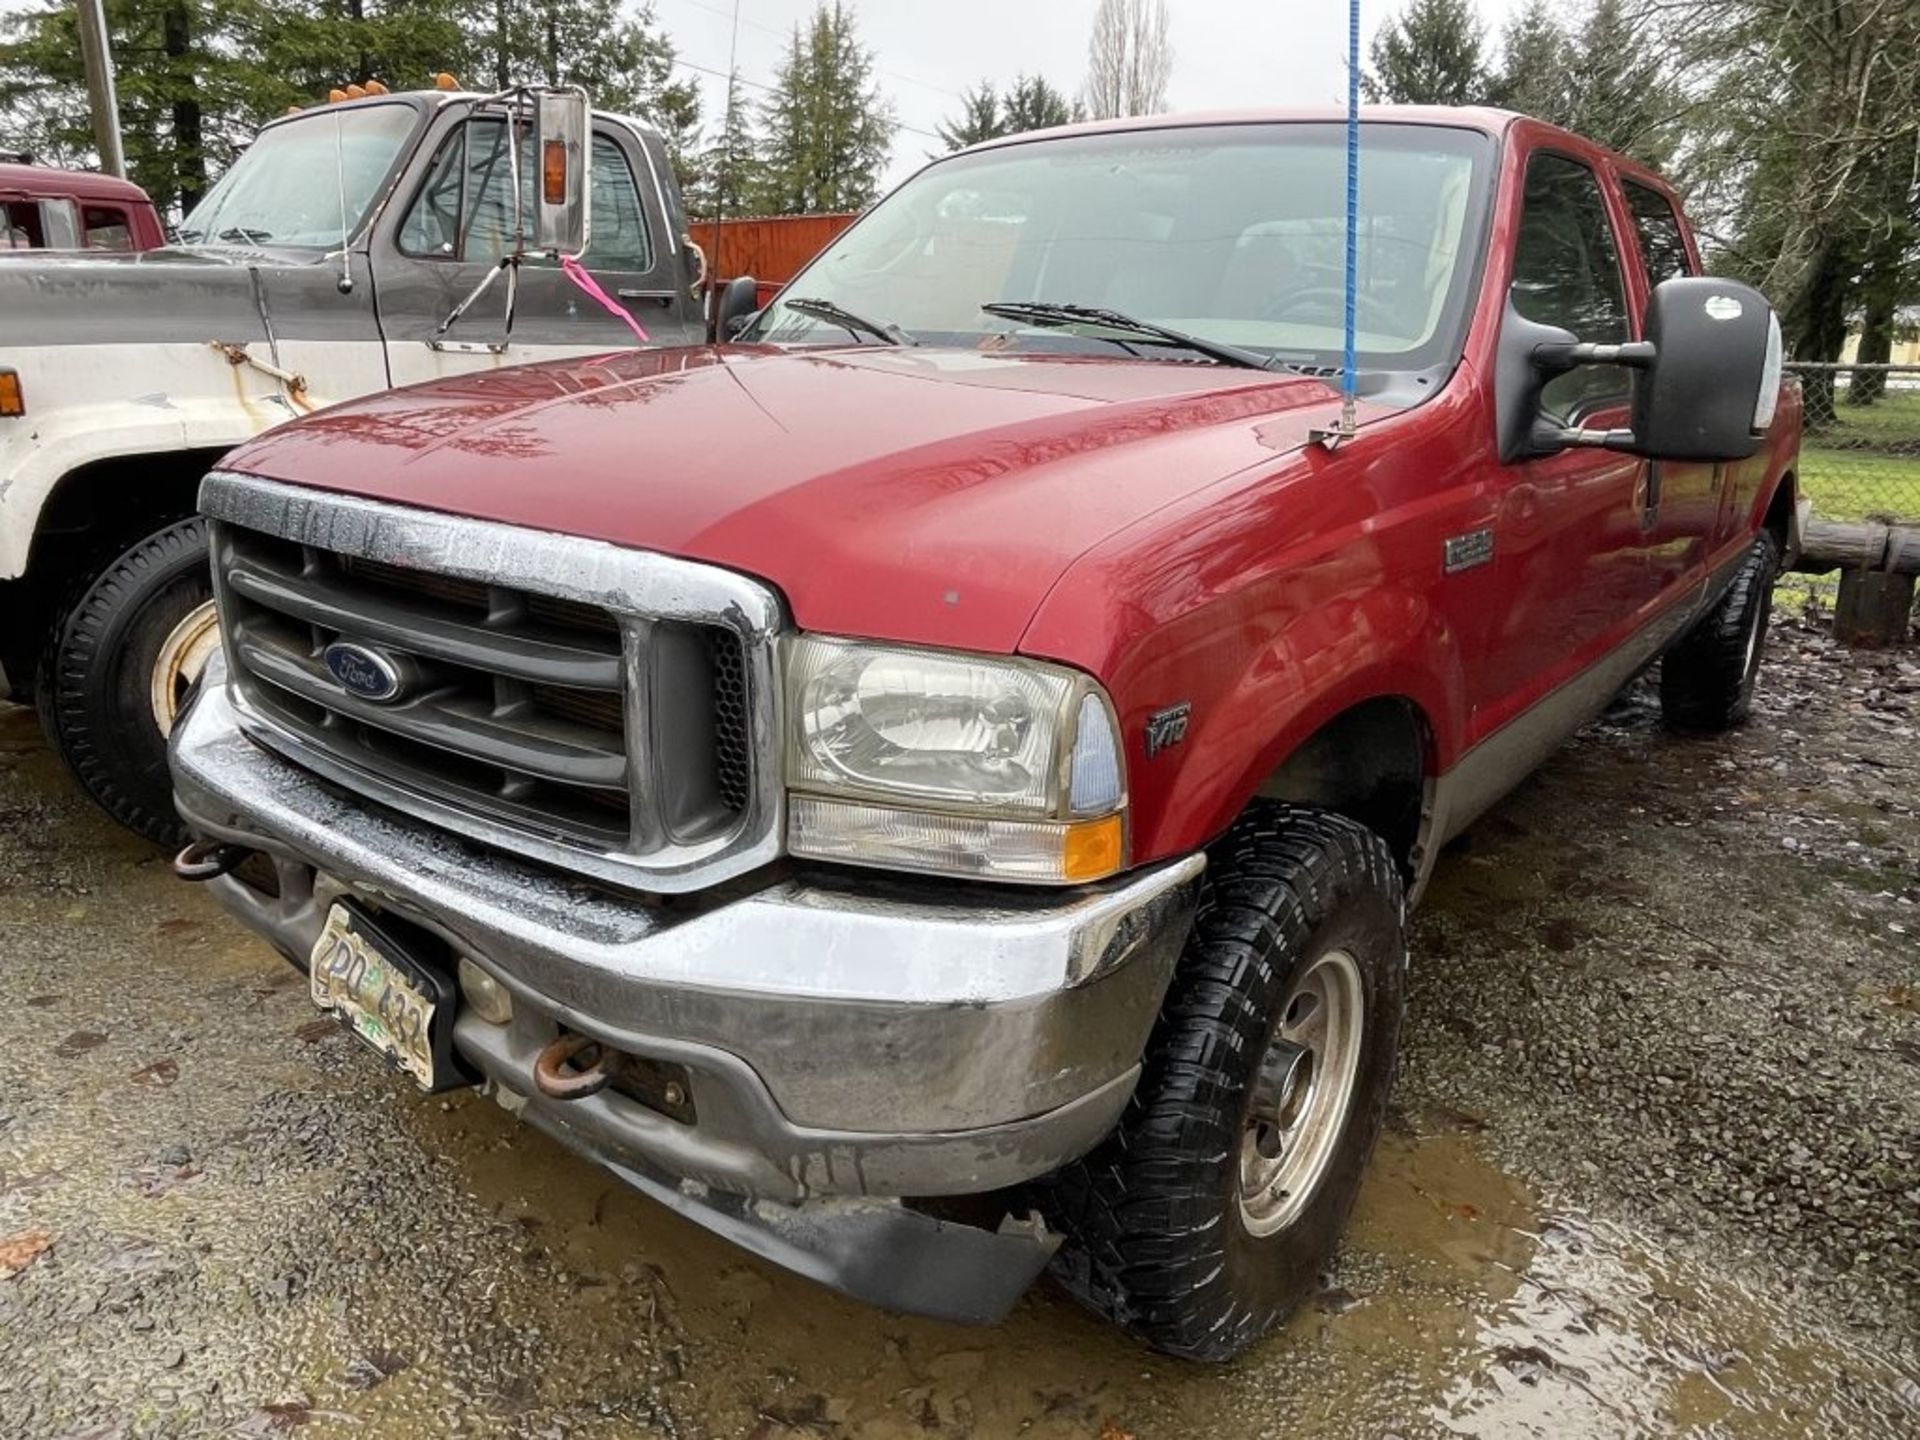 2003 Ford F350 SD 4x4 Crew Cab Pickup - Image 4 of 14